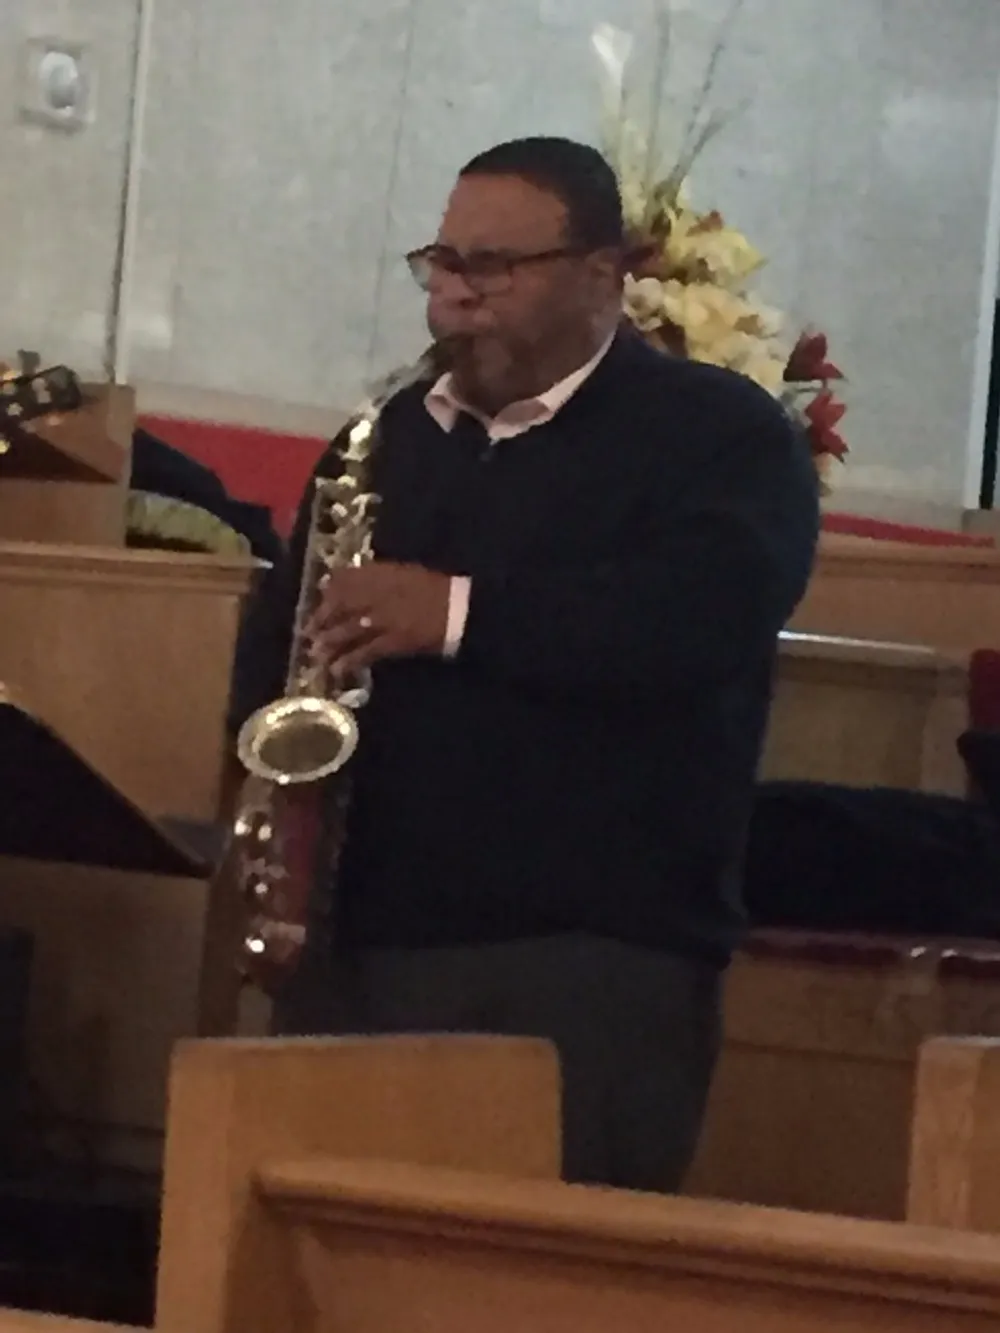 A musician is playing a saxophone inside a church